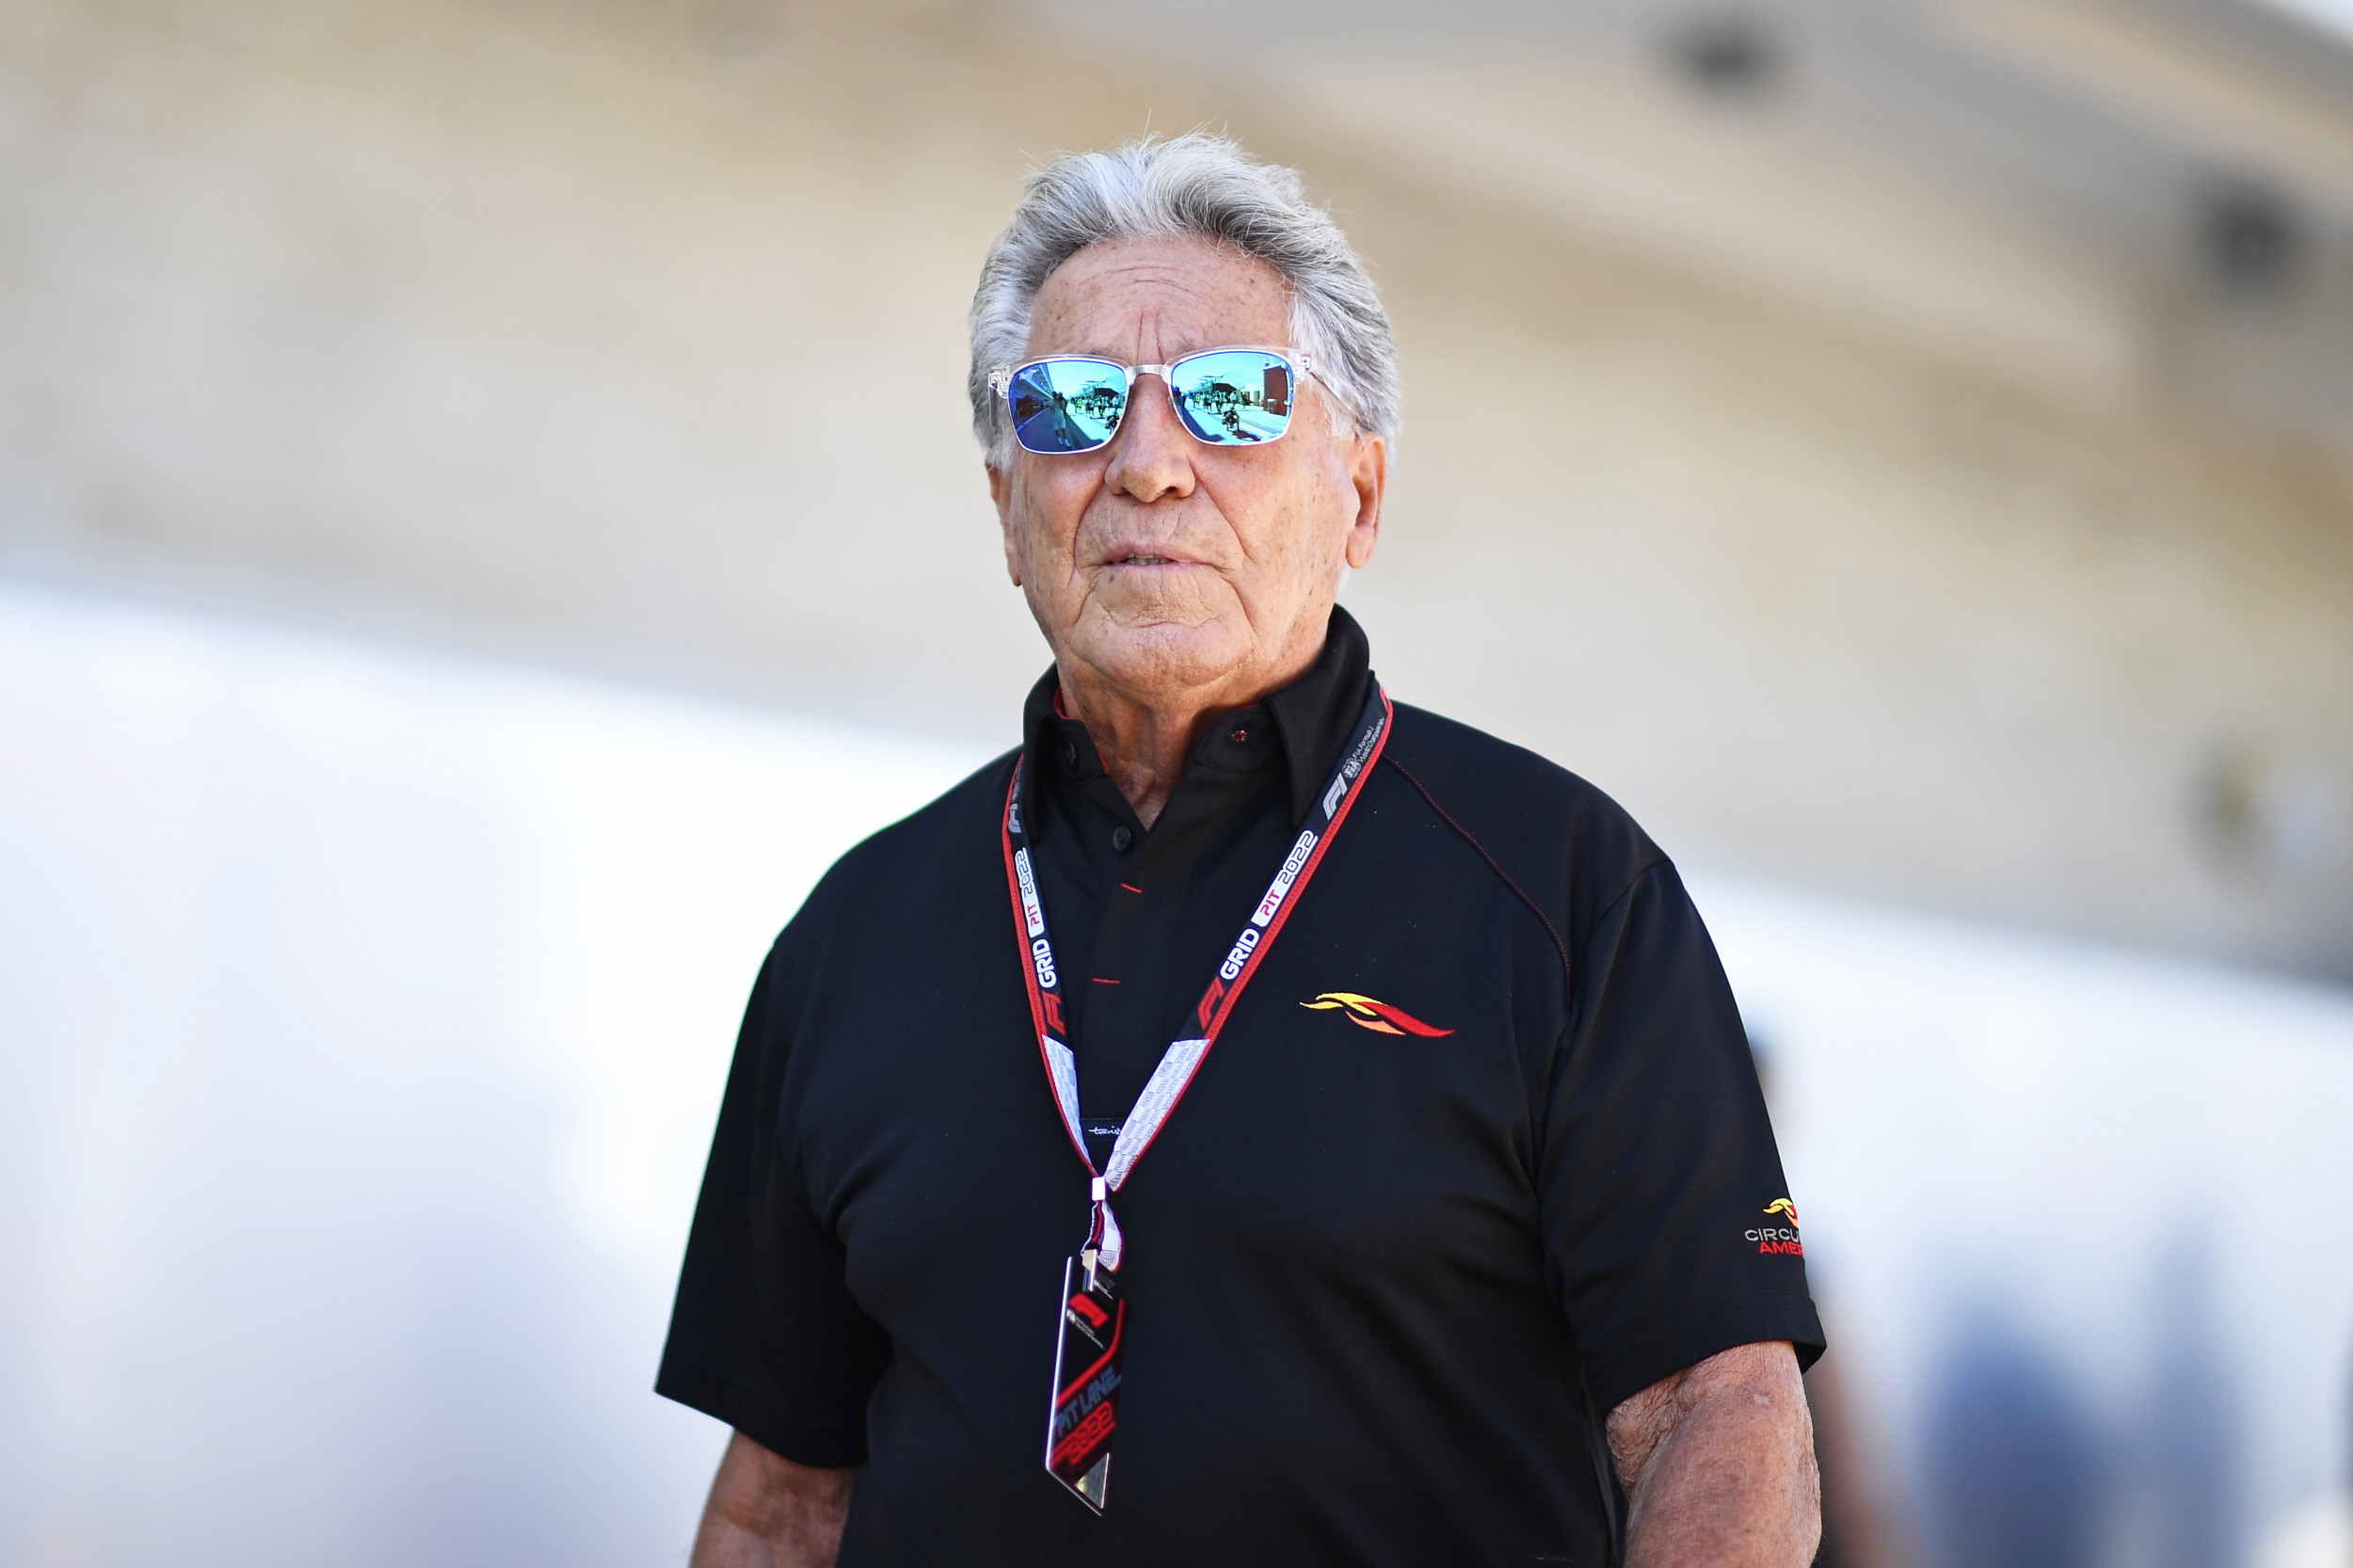 Mario Andretti reveals ‘very experiences individuals want to join us’ in F1